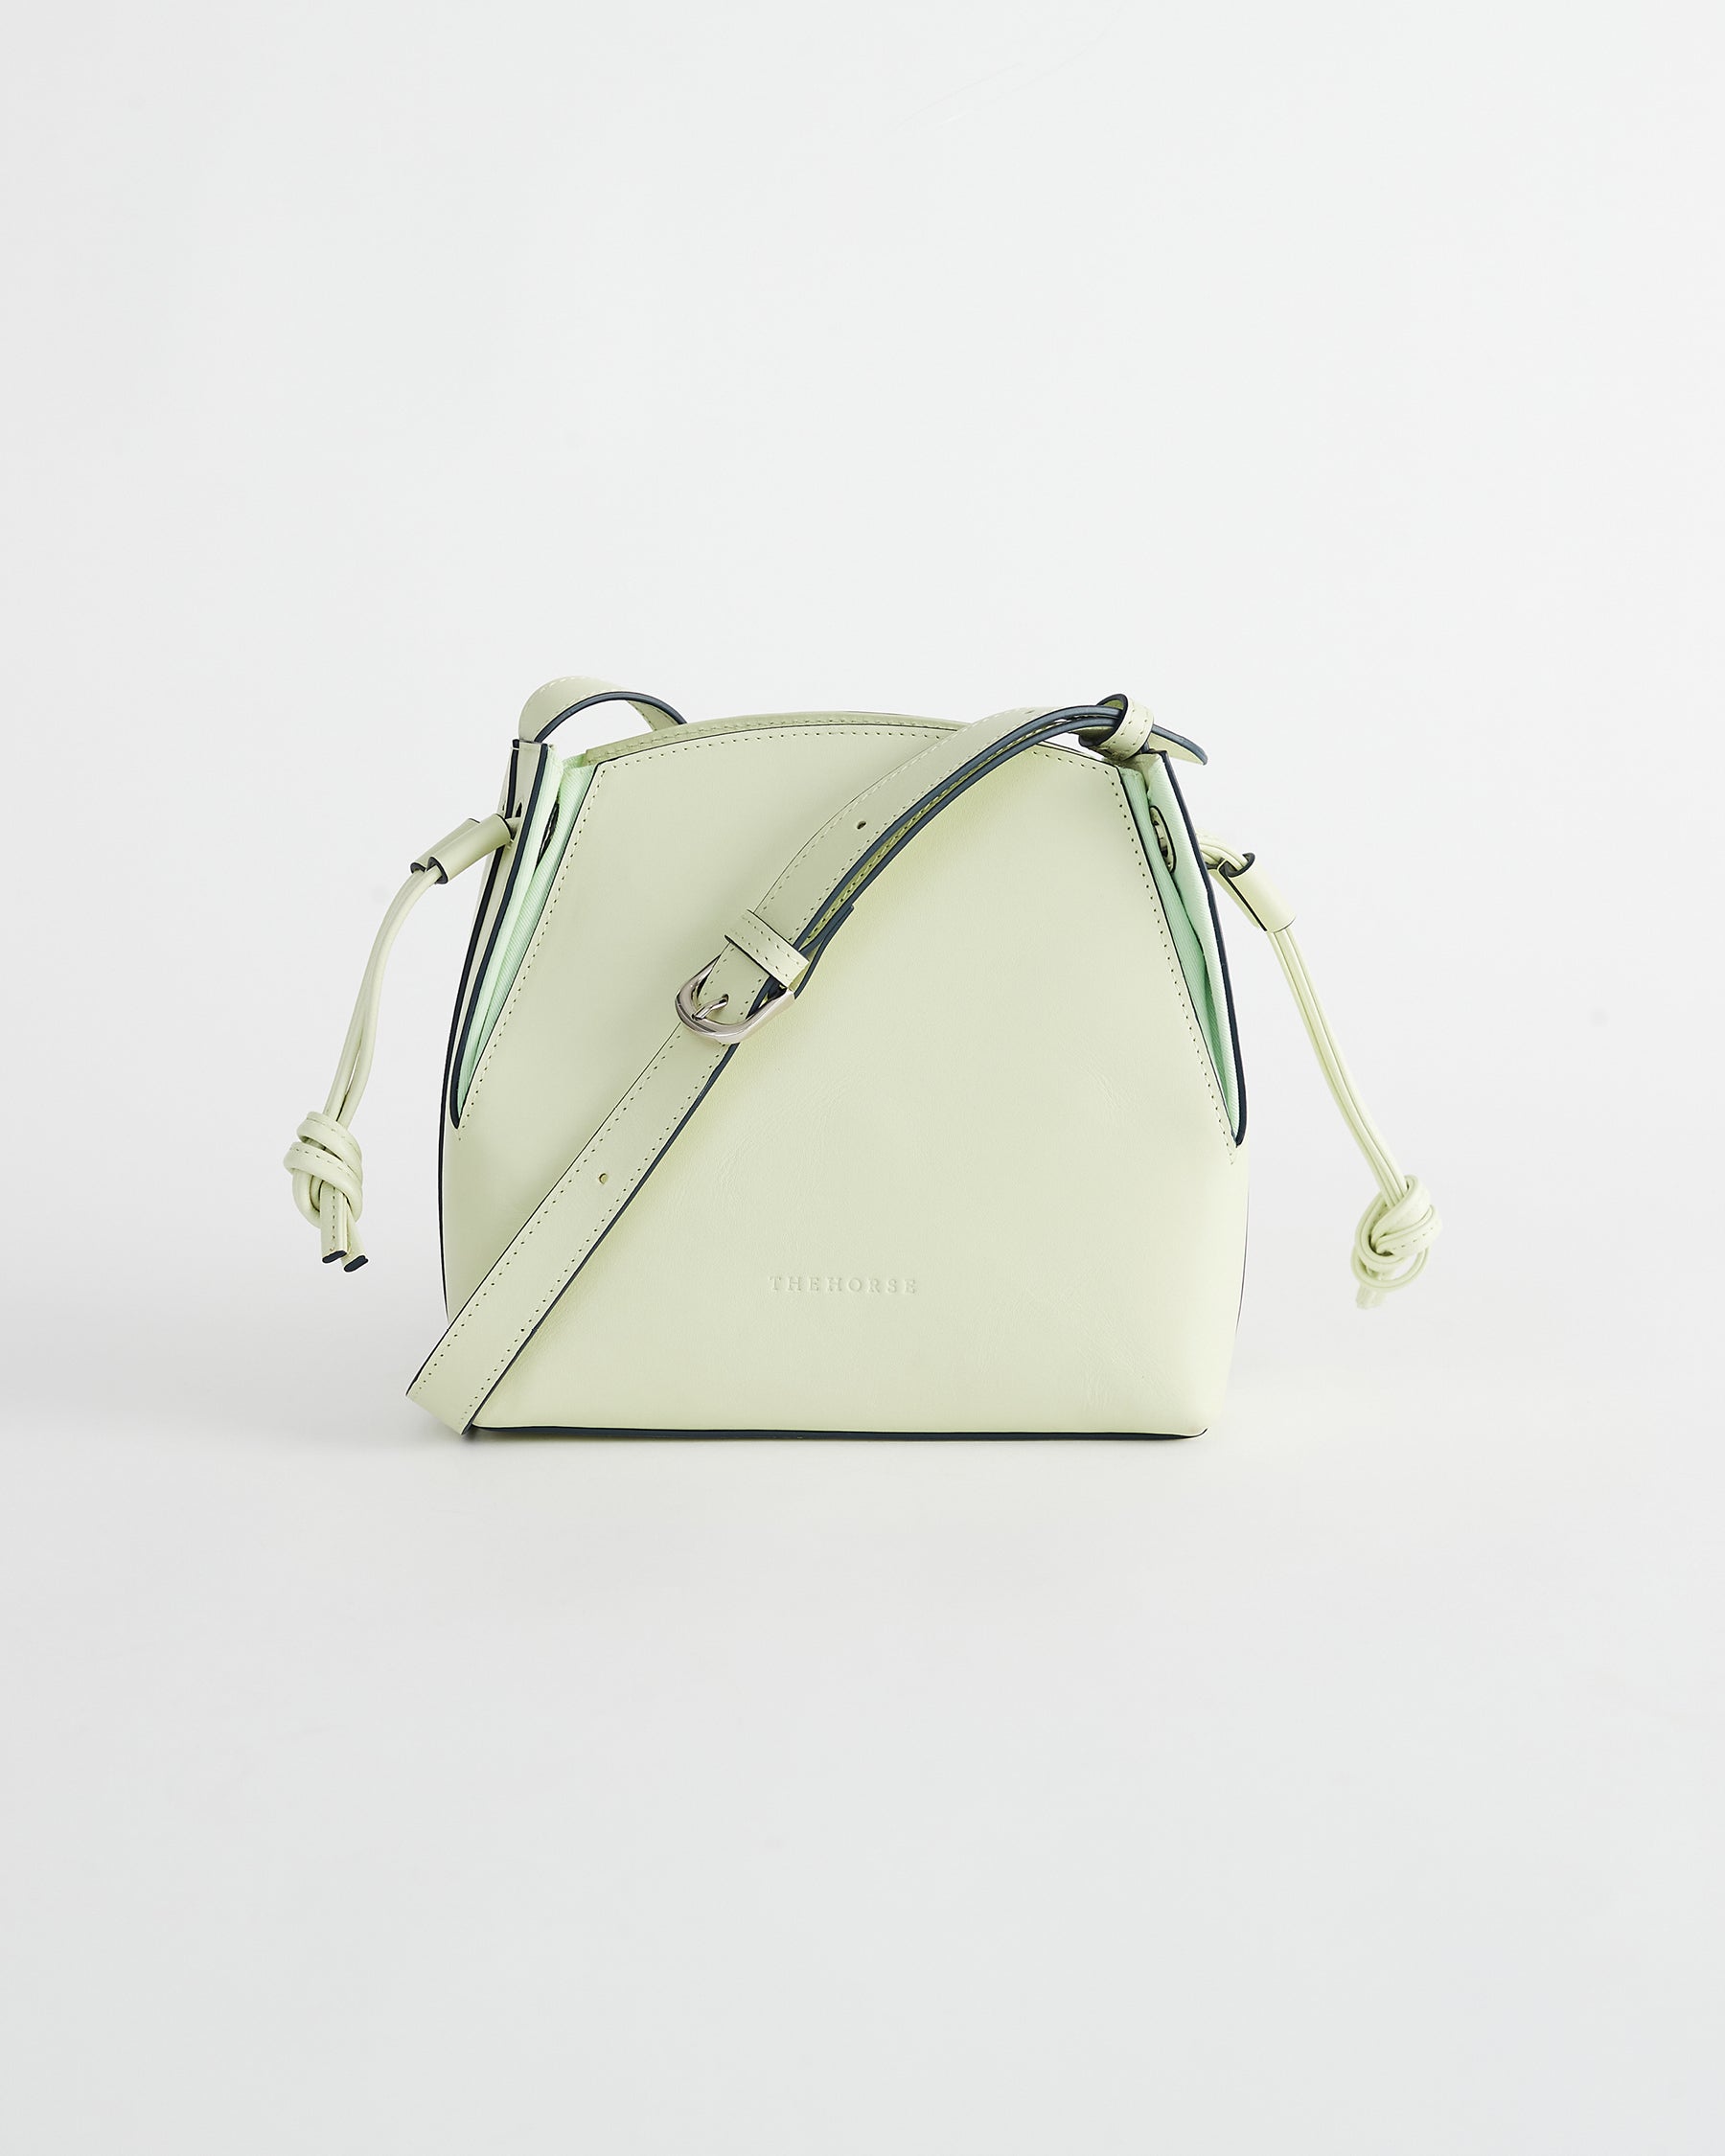 The Juno Leather Crossbody Shoulder Bag in Pistachio by The Horse®